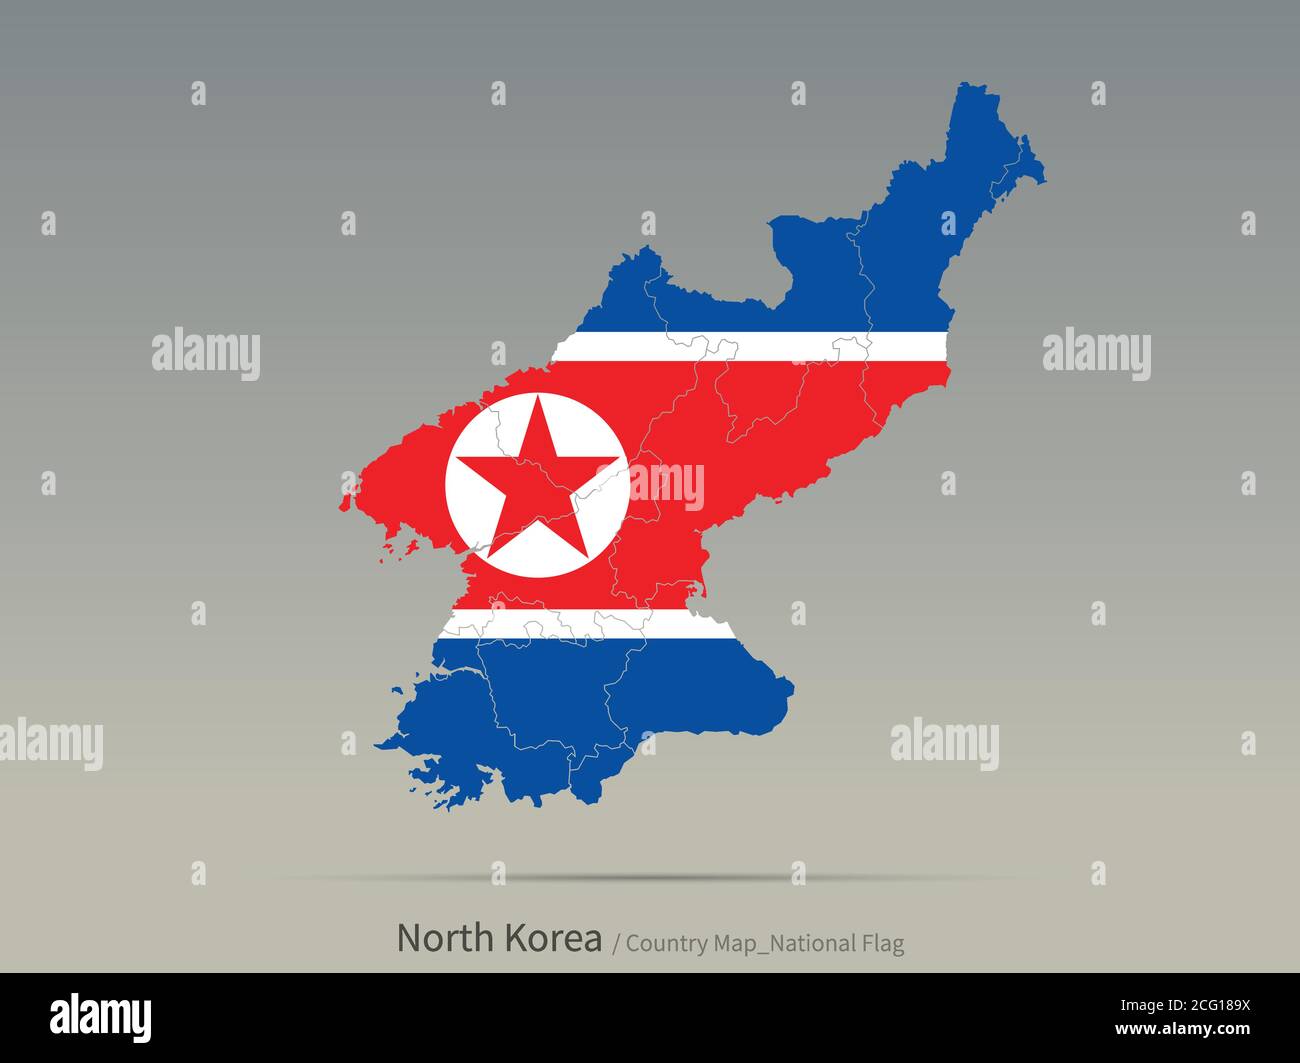 North Korea Flag Isolated on Map. Asian countries map and flag. Stock Vector